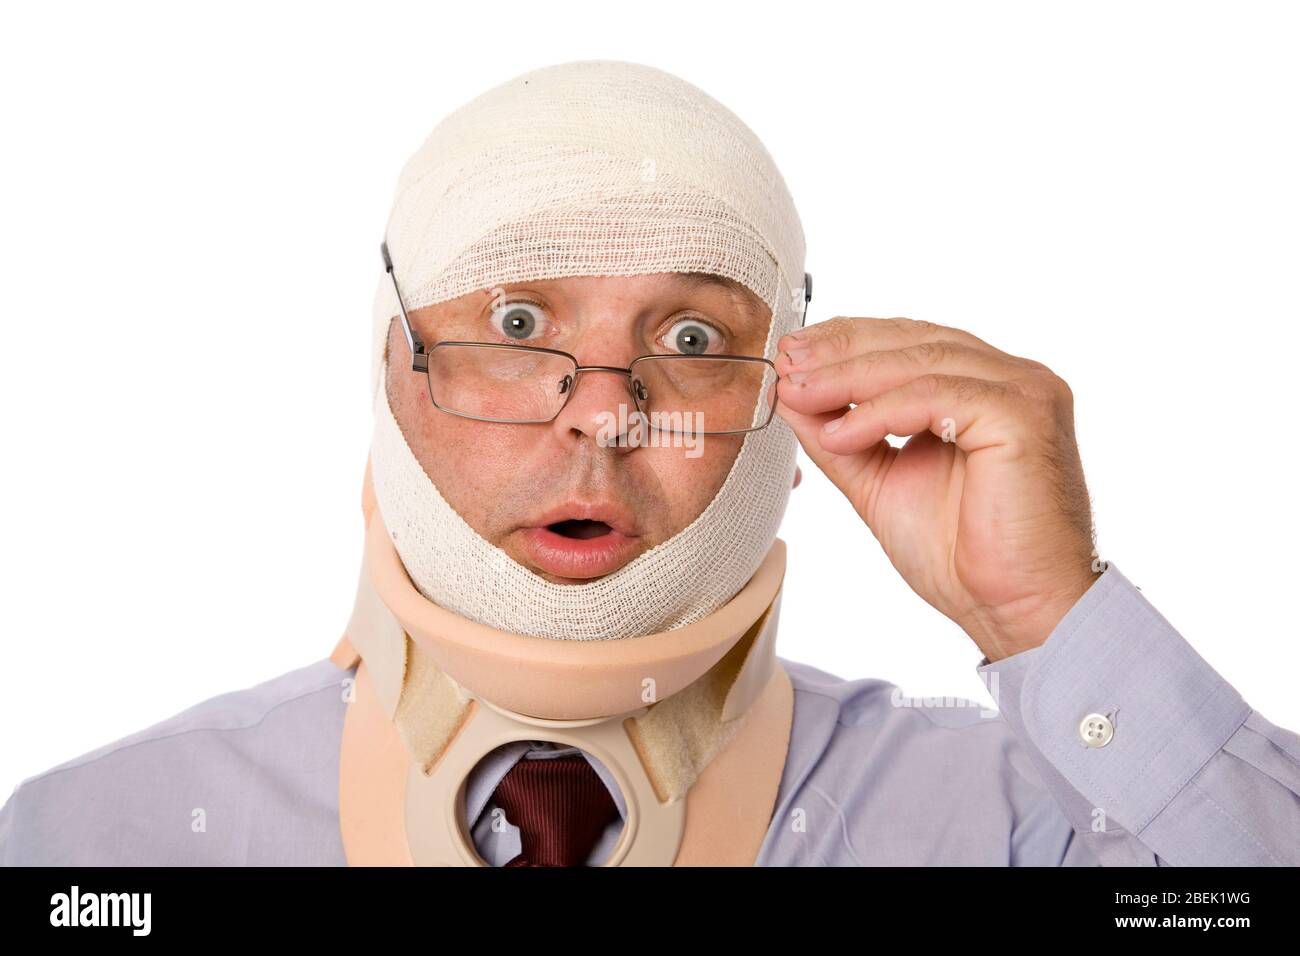 A traumatized man in neck brace and bandaged head. Stock Photo